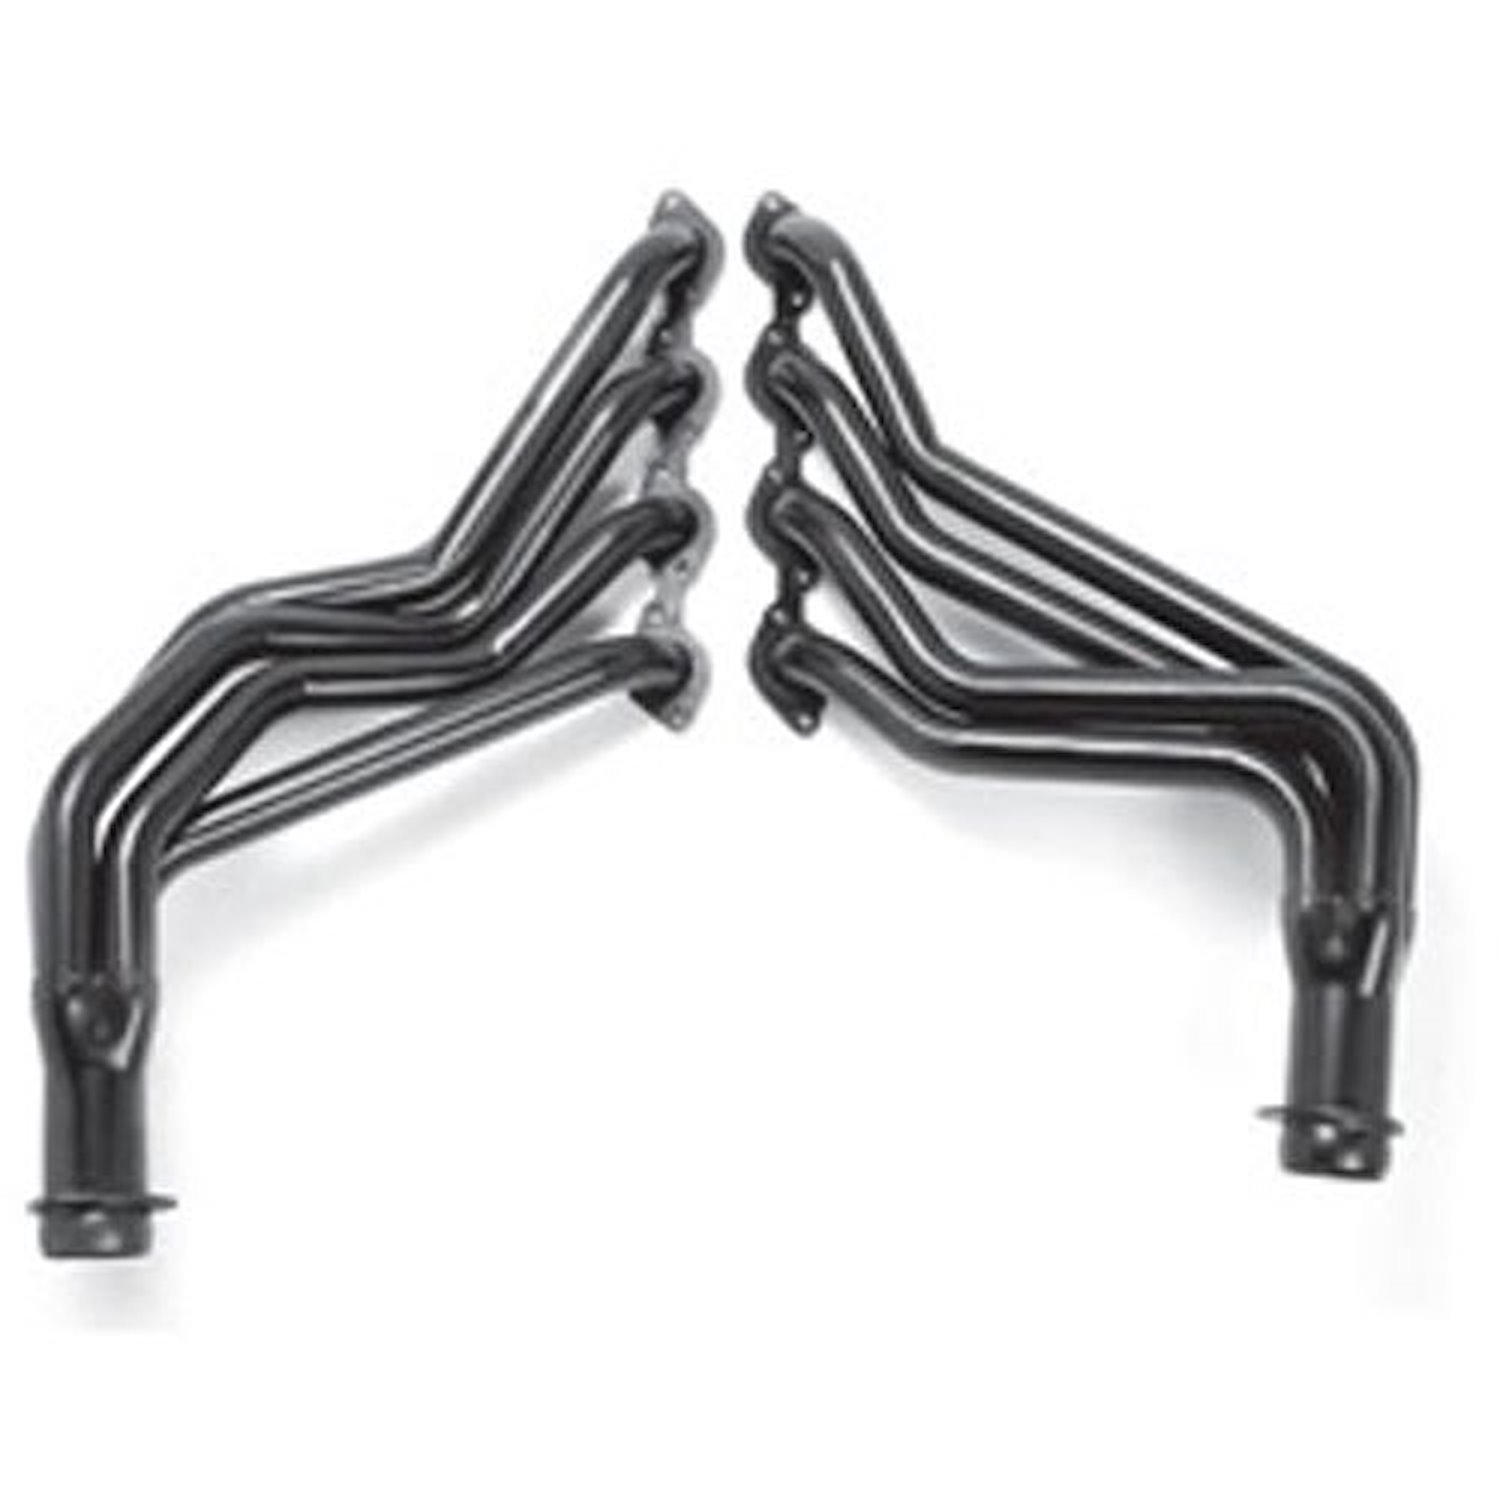 Standard Duty Uncoated Full Length Headers for 1967-81 Chevy/GMC Truck, Suburban, Blazer/Jimmy 2WD/4WD 396-502